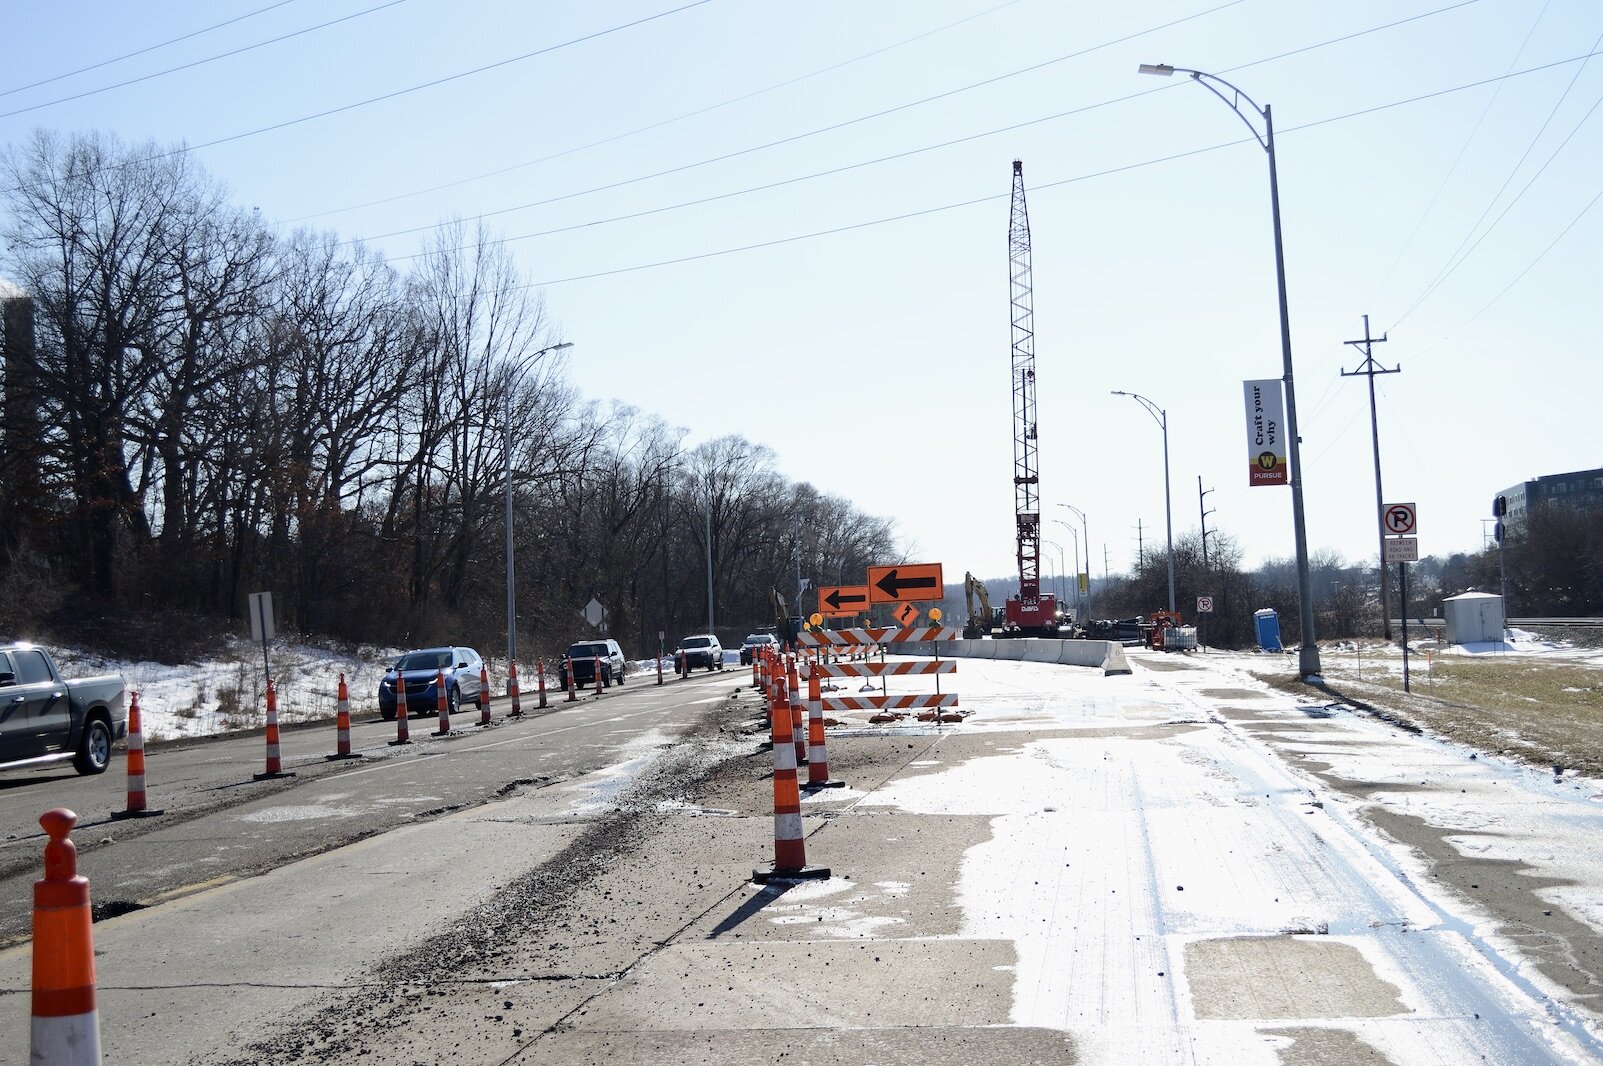 Construction started Feb. 14 with a culvert replacement south/west of Oliver Street. Work on resurfacing, the new median and pathway will begin in May. The project is expected to be finished at the end of October.